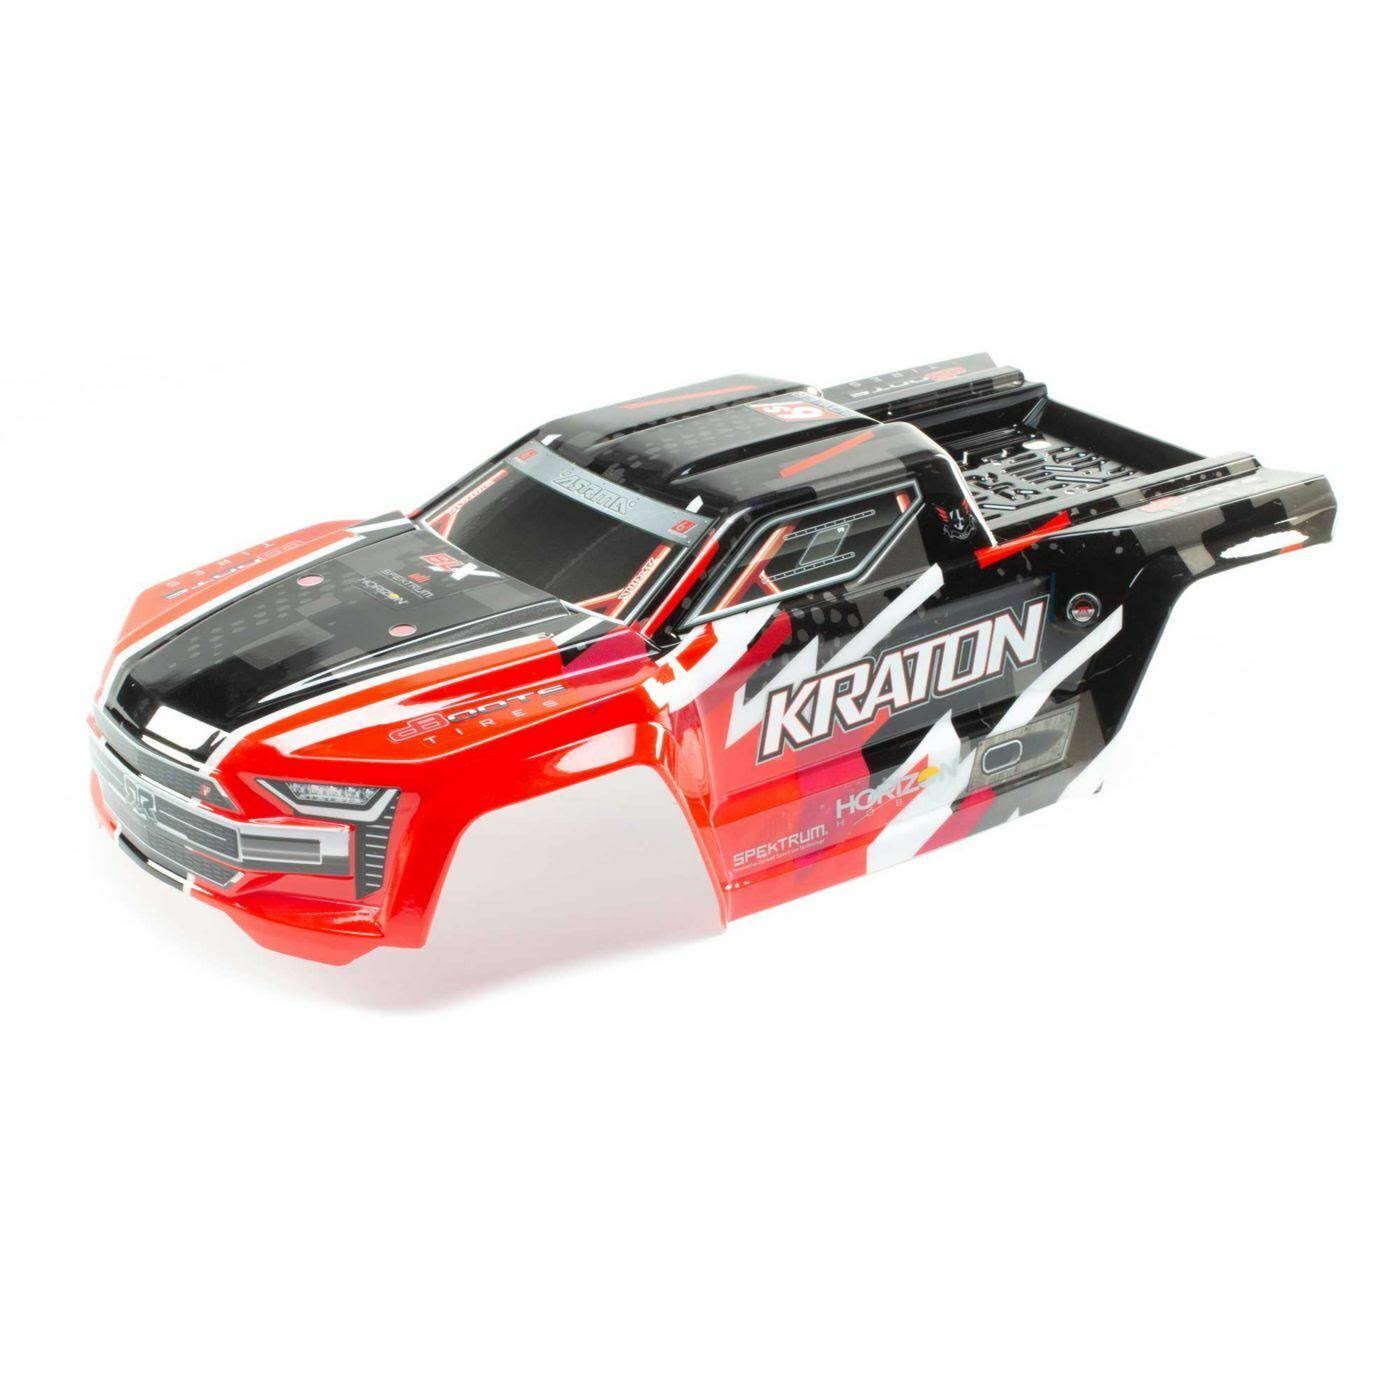 Arrma ARA406156 Kraton 6S BLX Painted Body with Decals (Red)